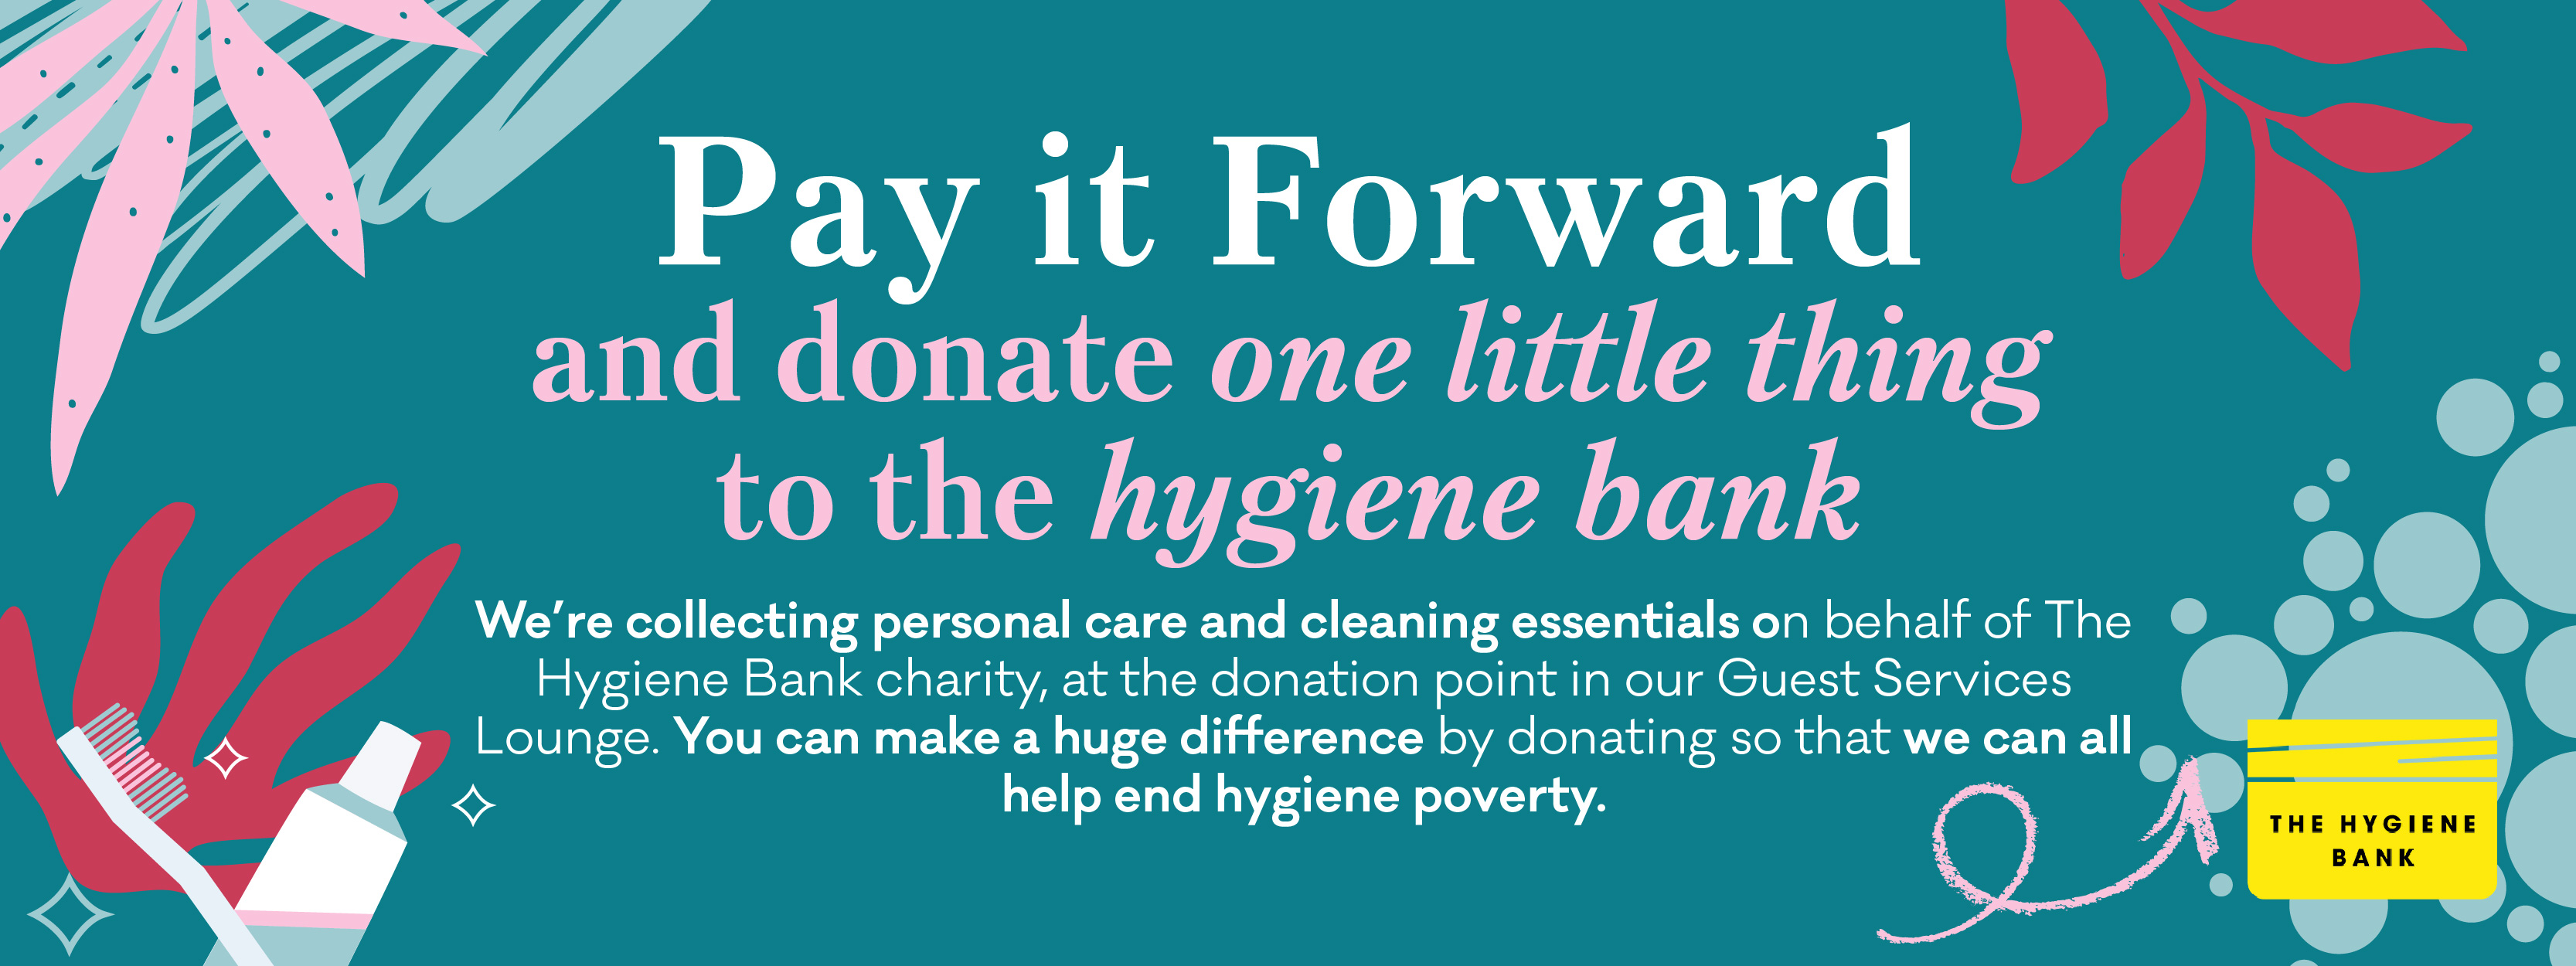 PAY IT FORWARD AND DONATE ONE LITTLE THING TO THE HYGIENE BANK